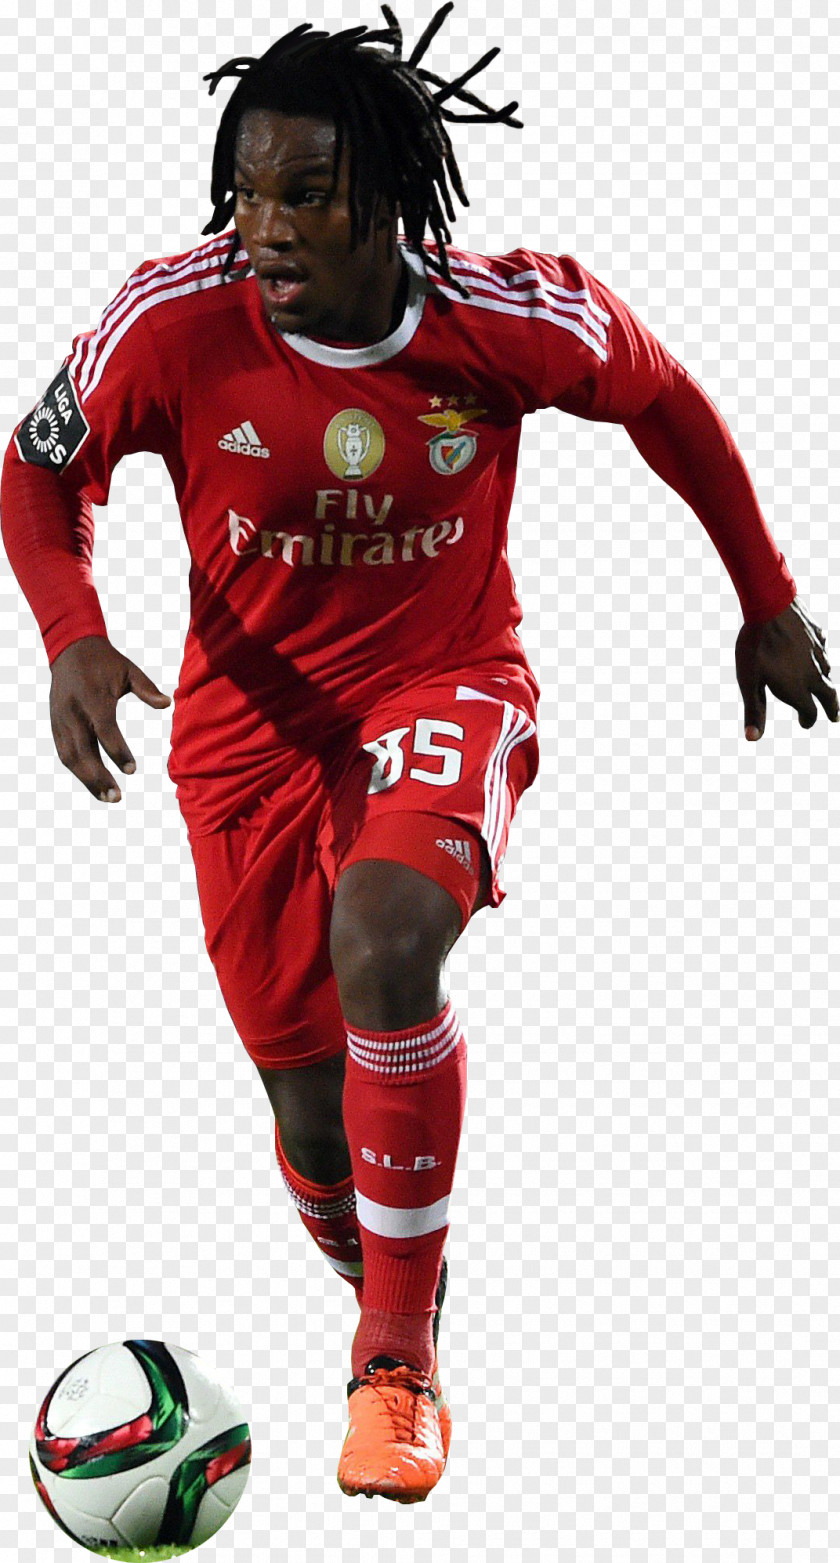 Football Renato Sanches S.L. Benfica Portugal National Team Soccer Player FC Bayern Munich PNG